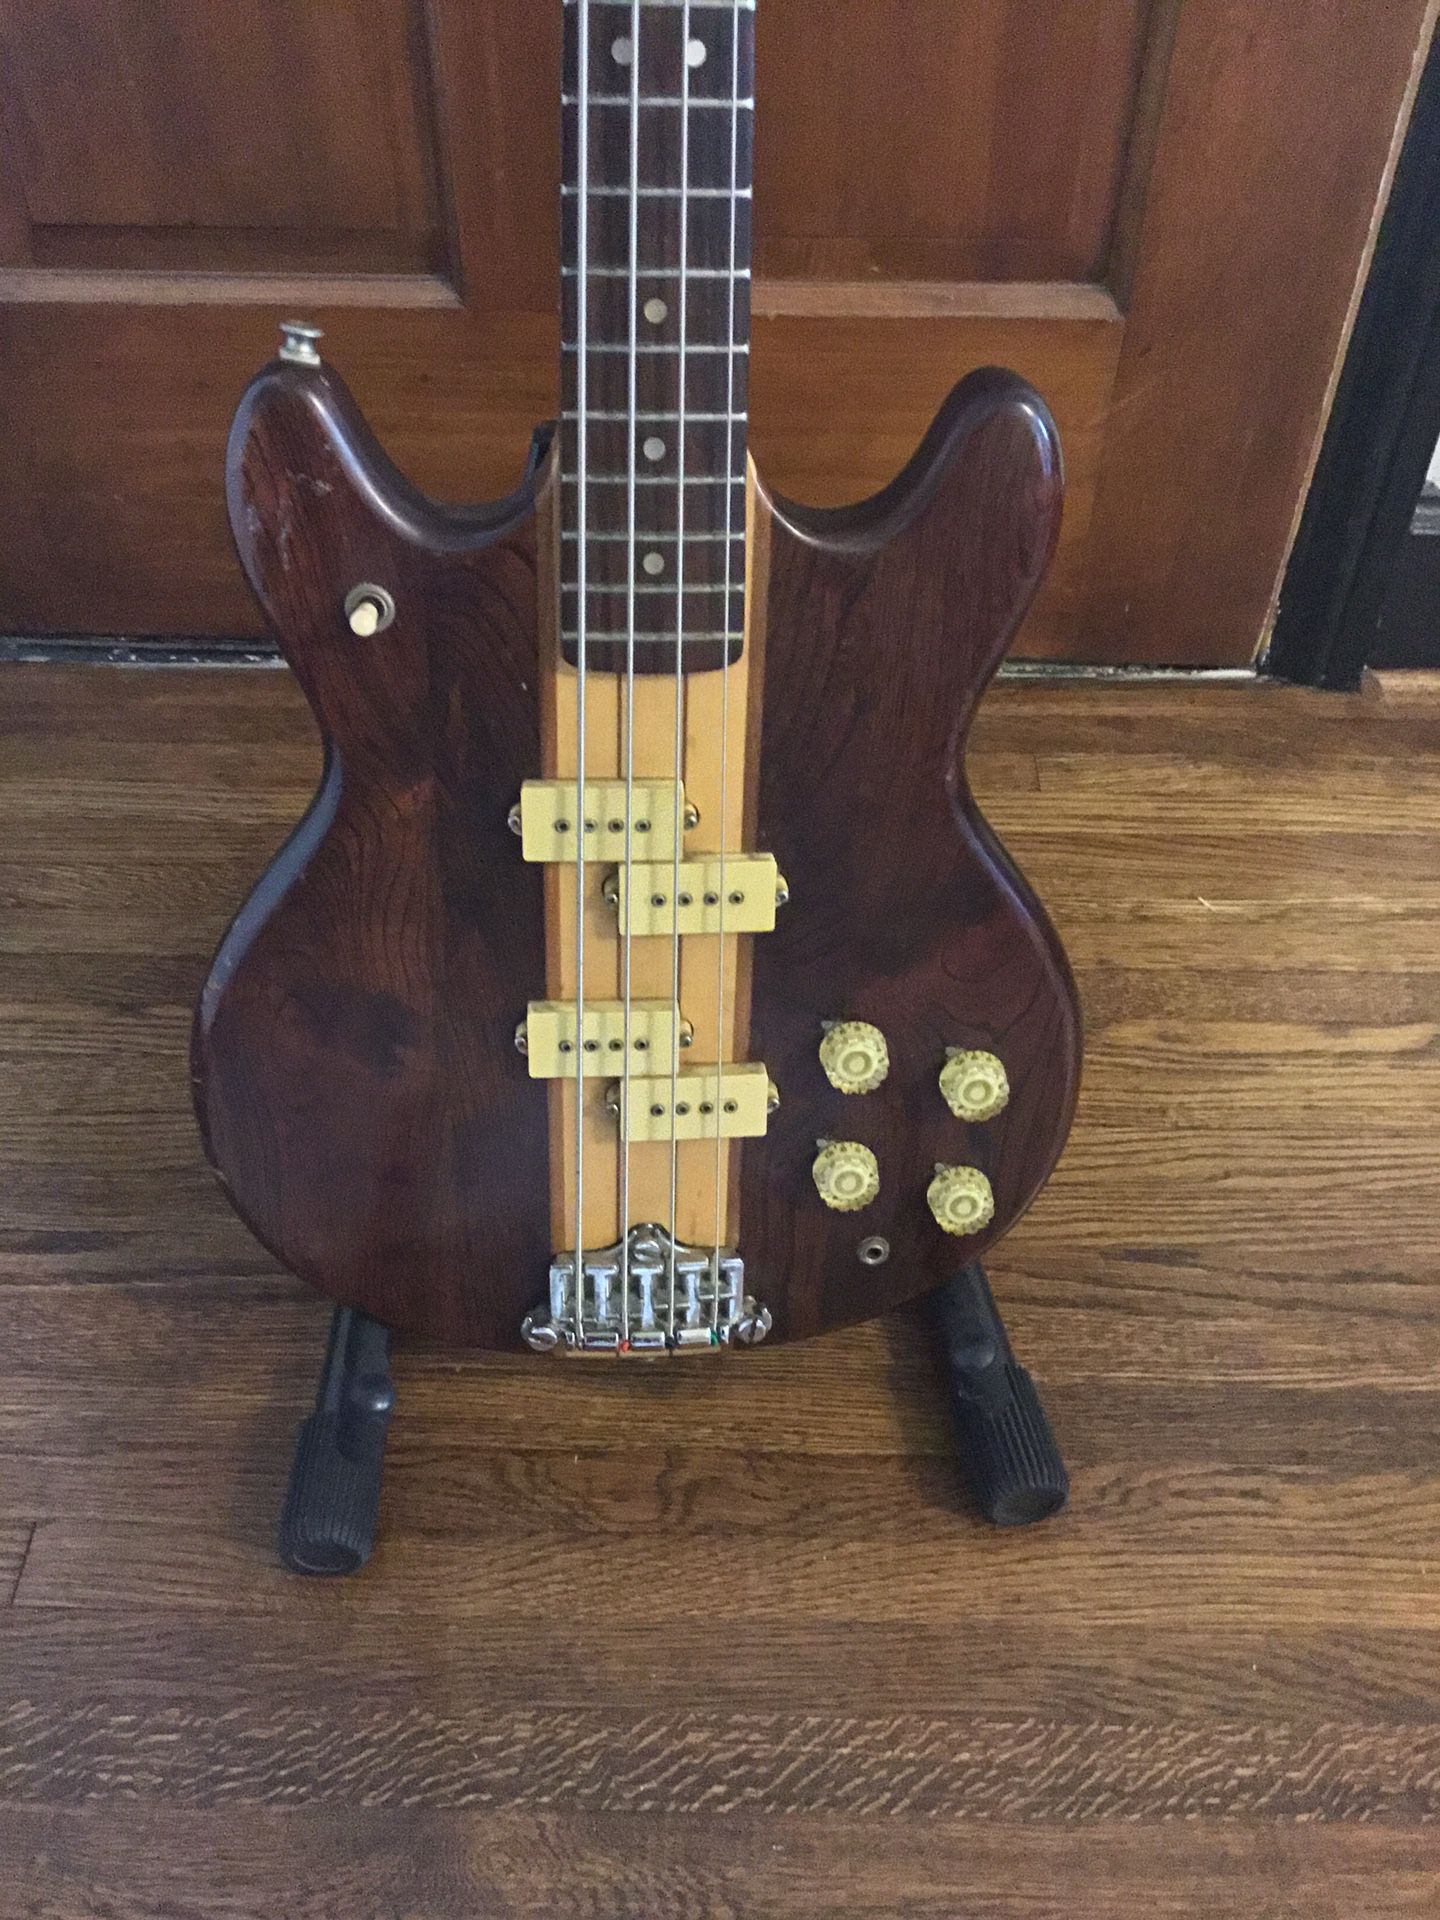 1979 Vantage Bass - made in Japan. Neck through body with double P-bass pick ups.